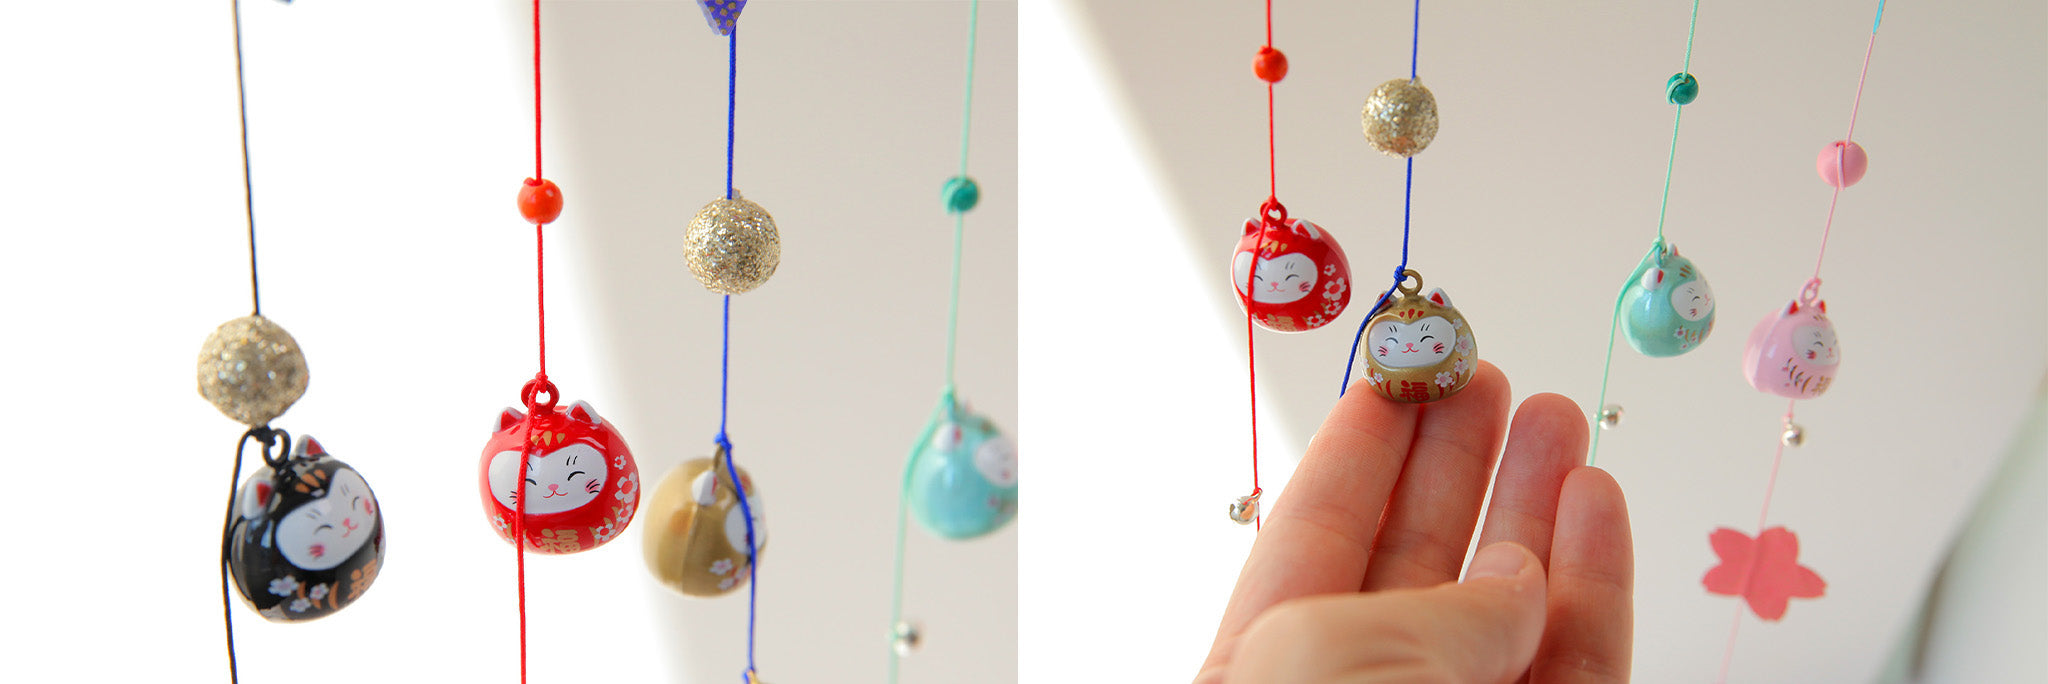 article-blog-diy-garland-lucky-charm-ambience-3